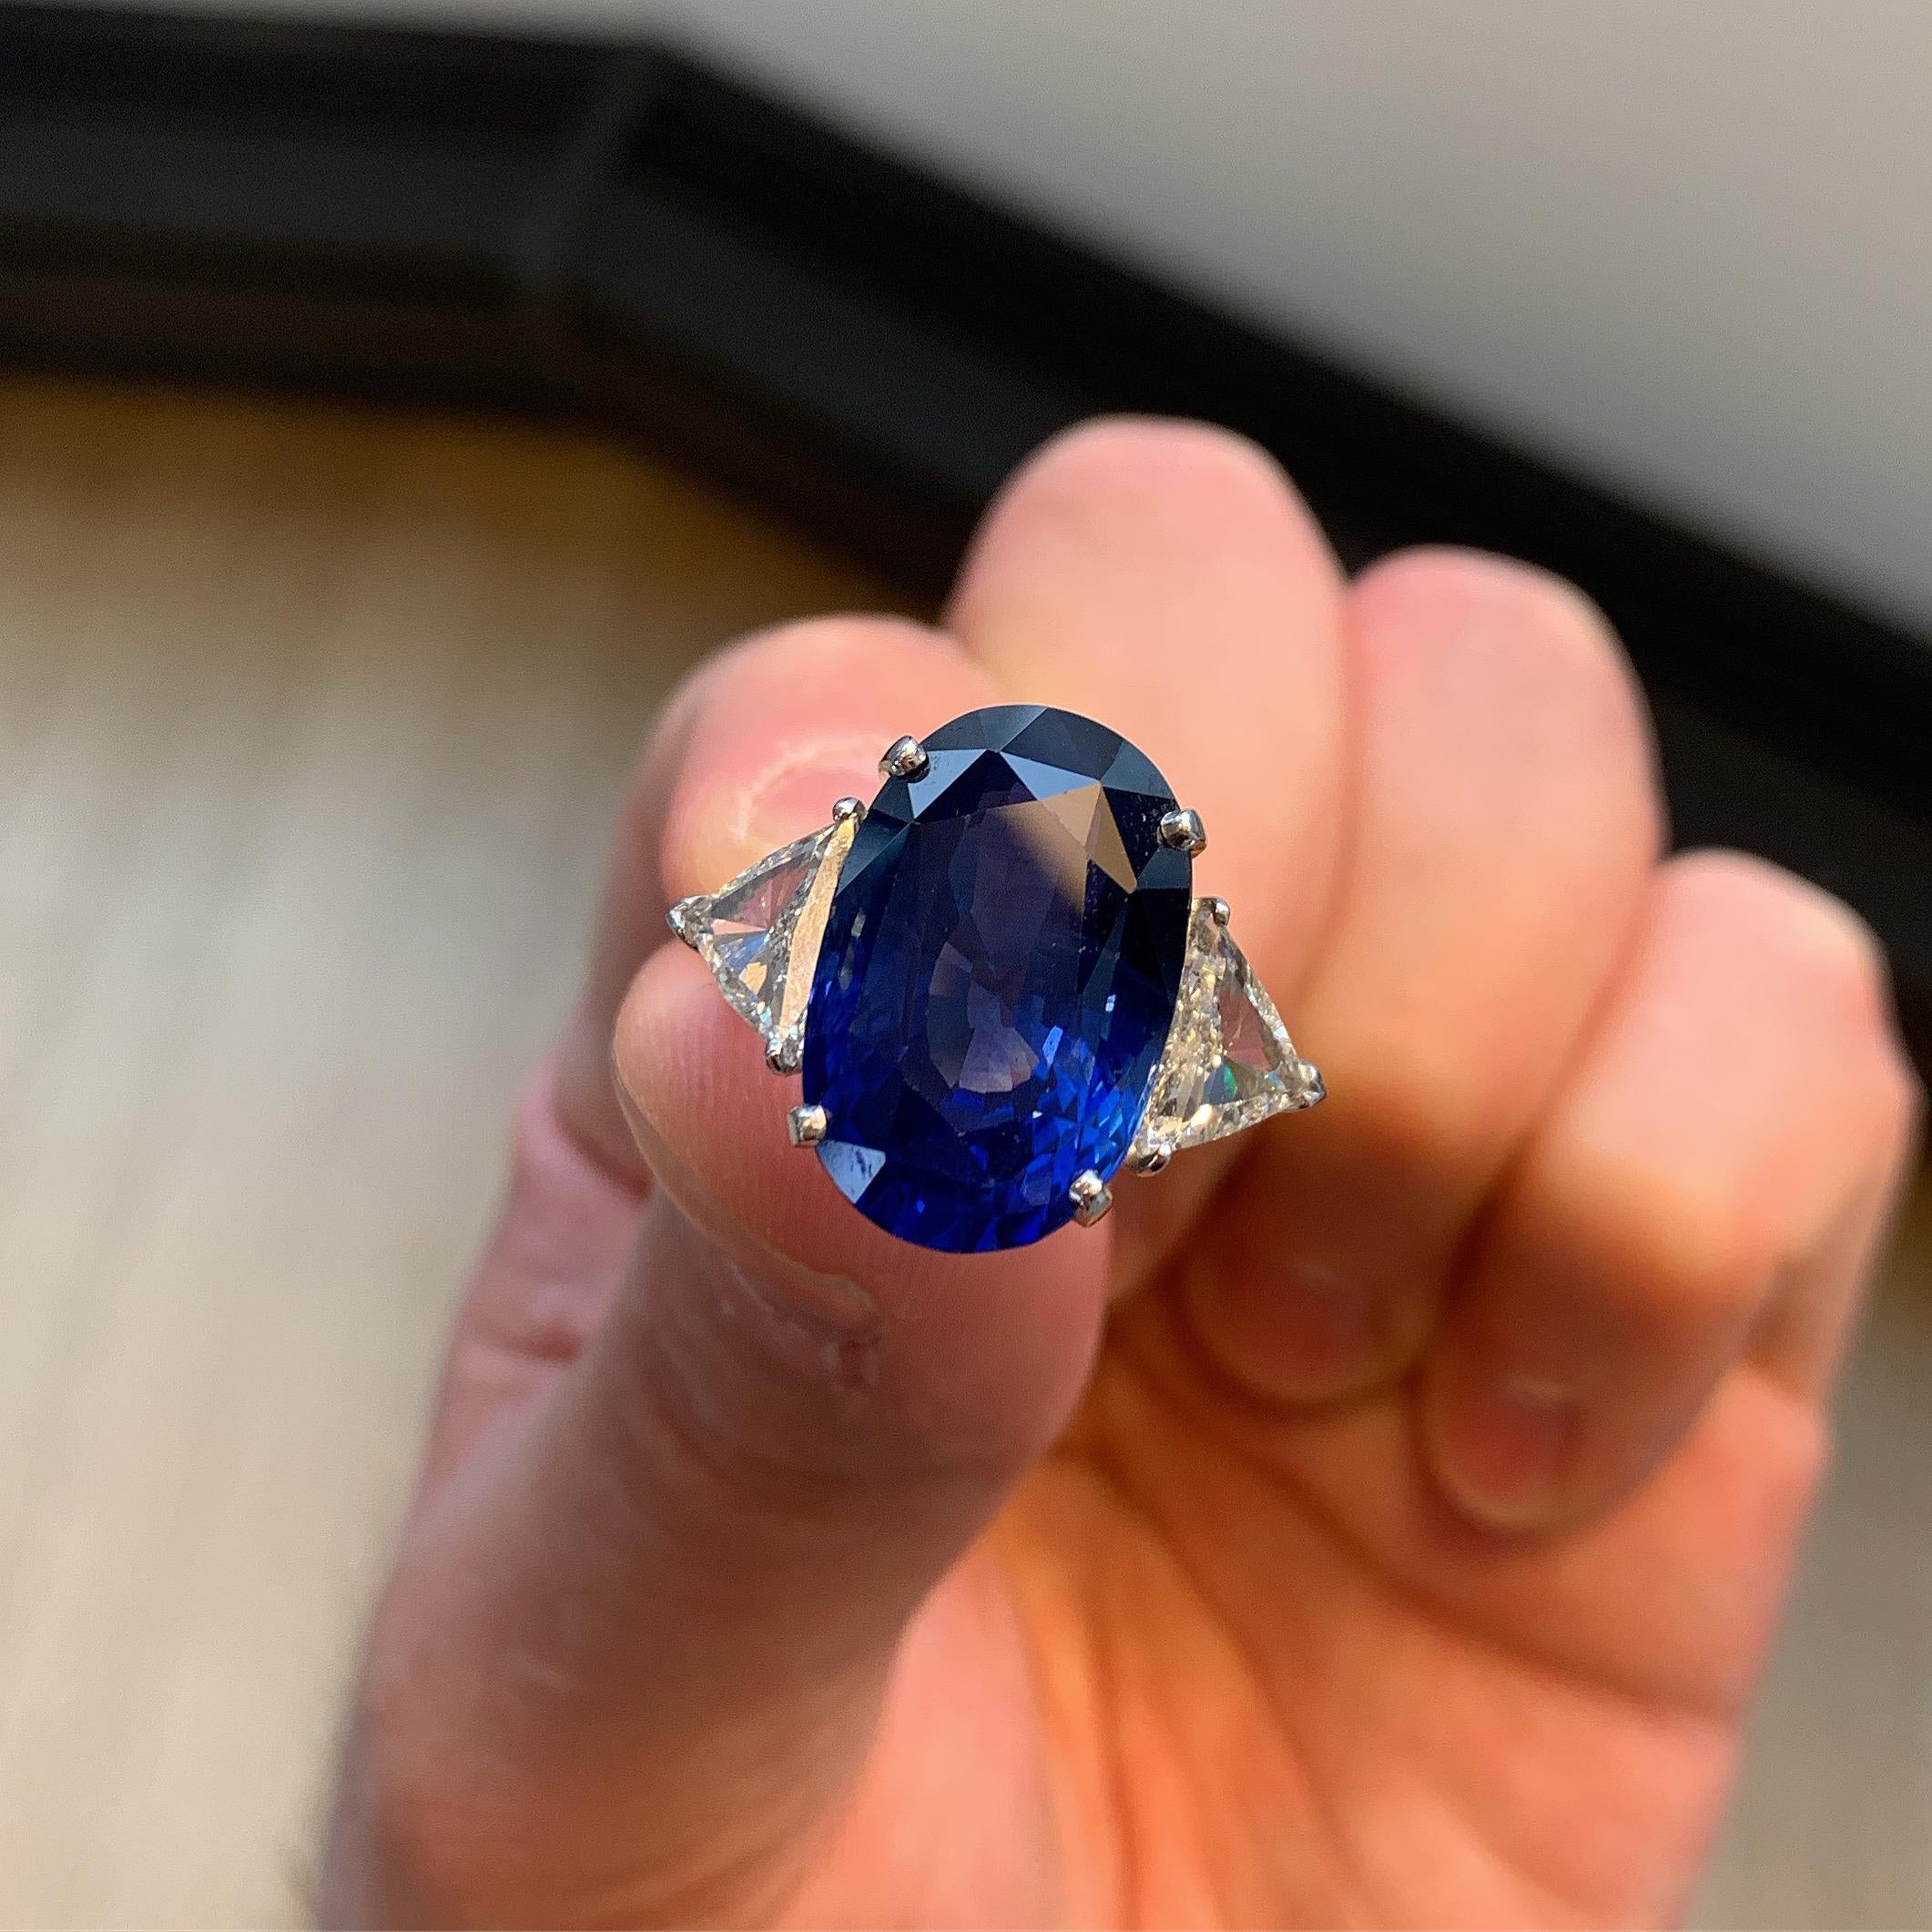 18.75 ct Oval Sapphire and Diamond Ring

Two triangular diamonds weigh 1.65 cts